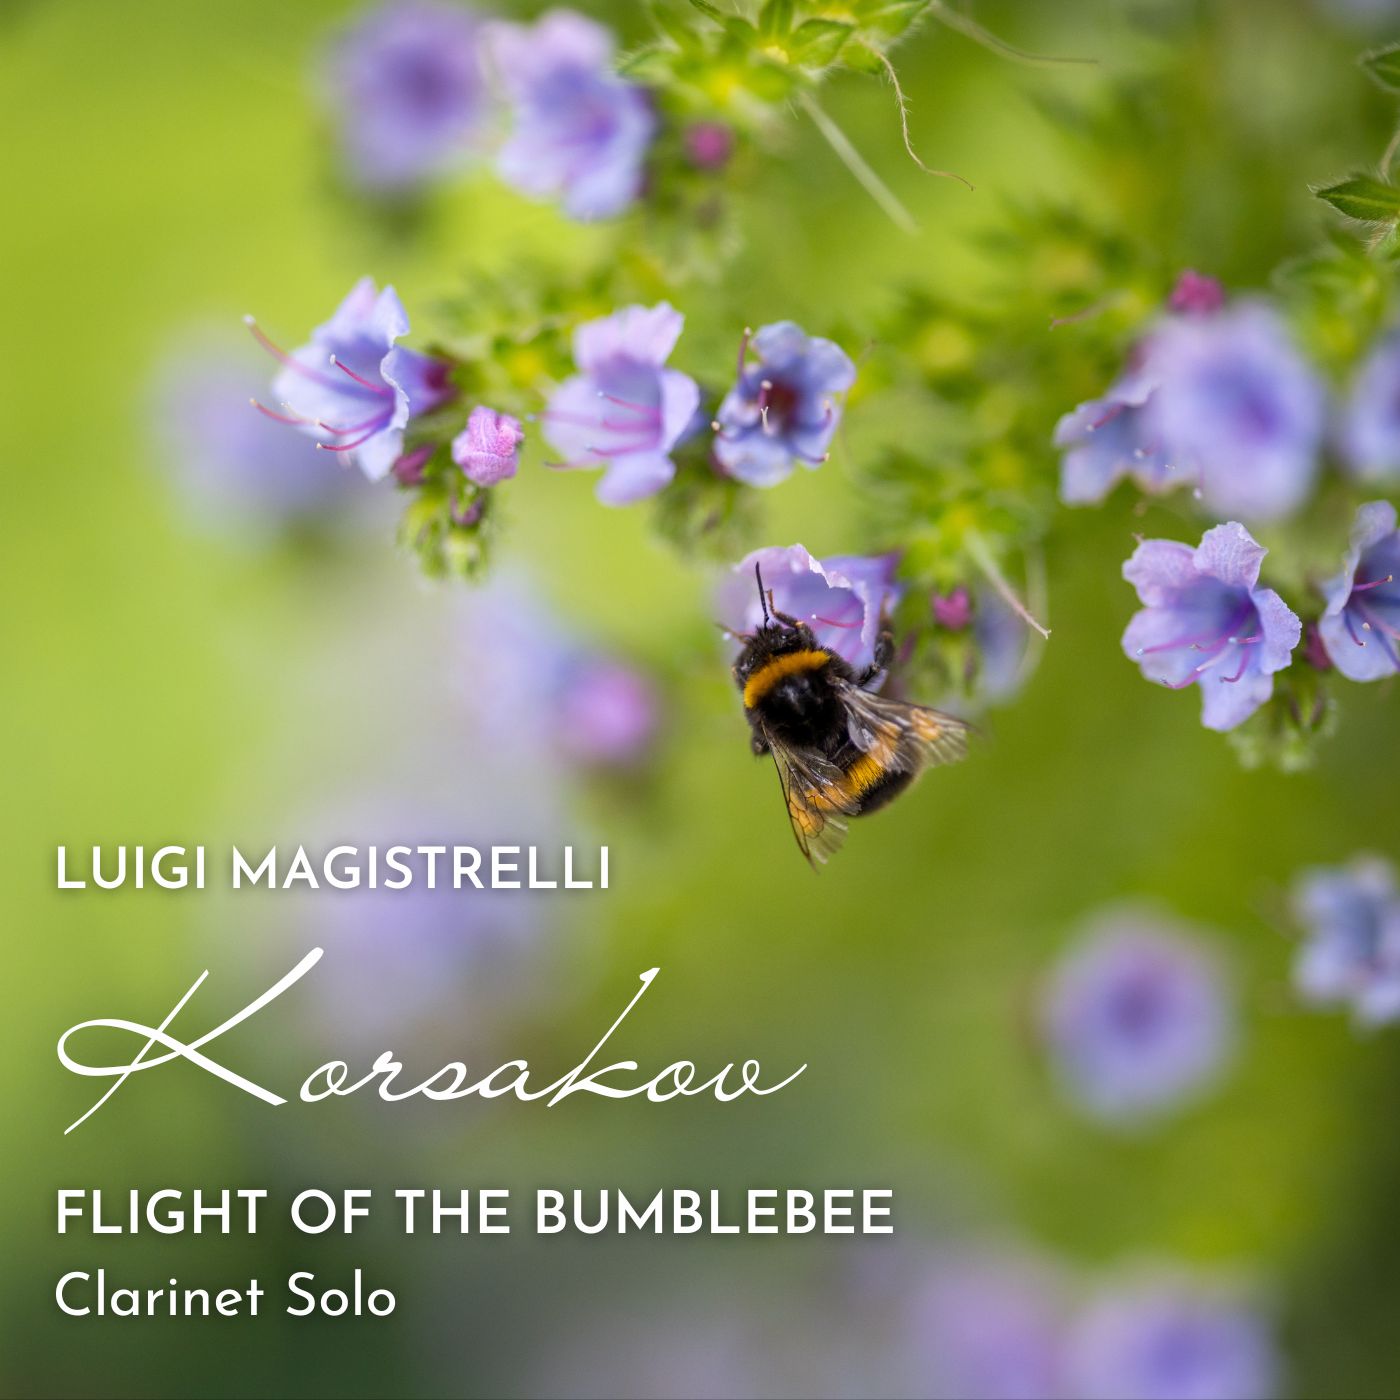 Flight of the Bumblebee (Clarinet Solo)